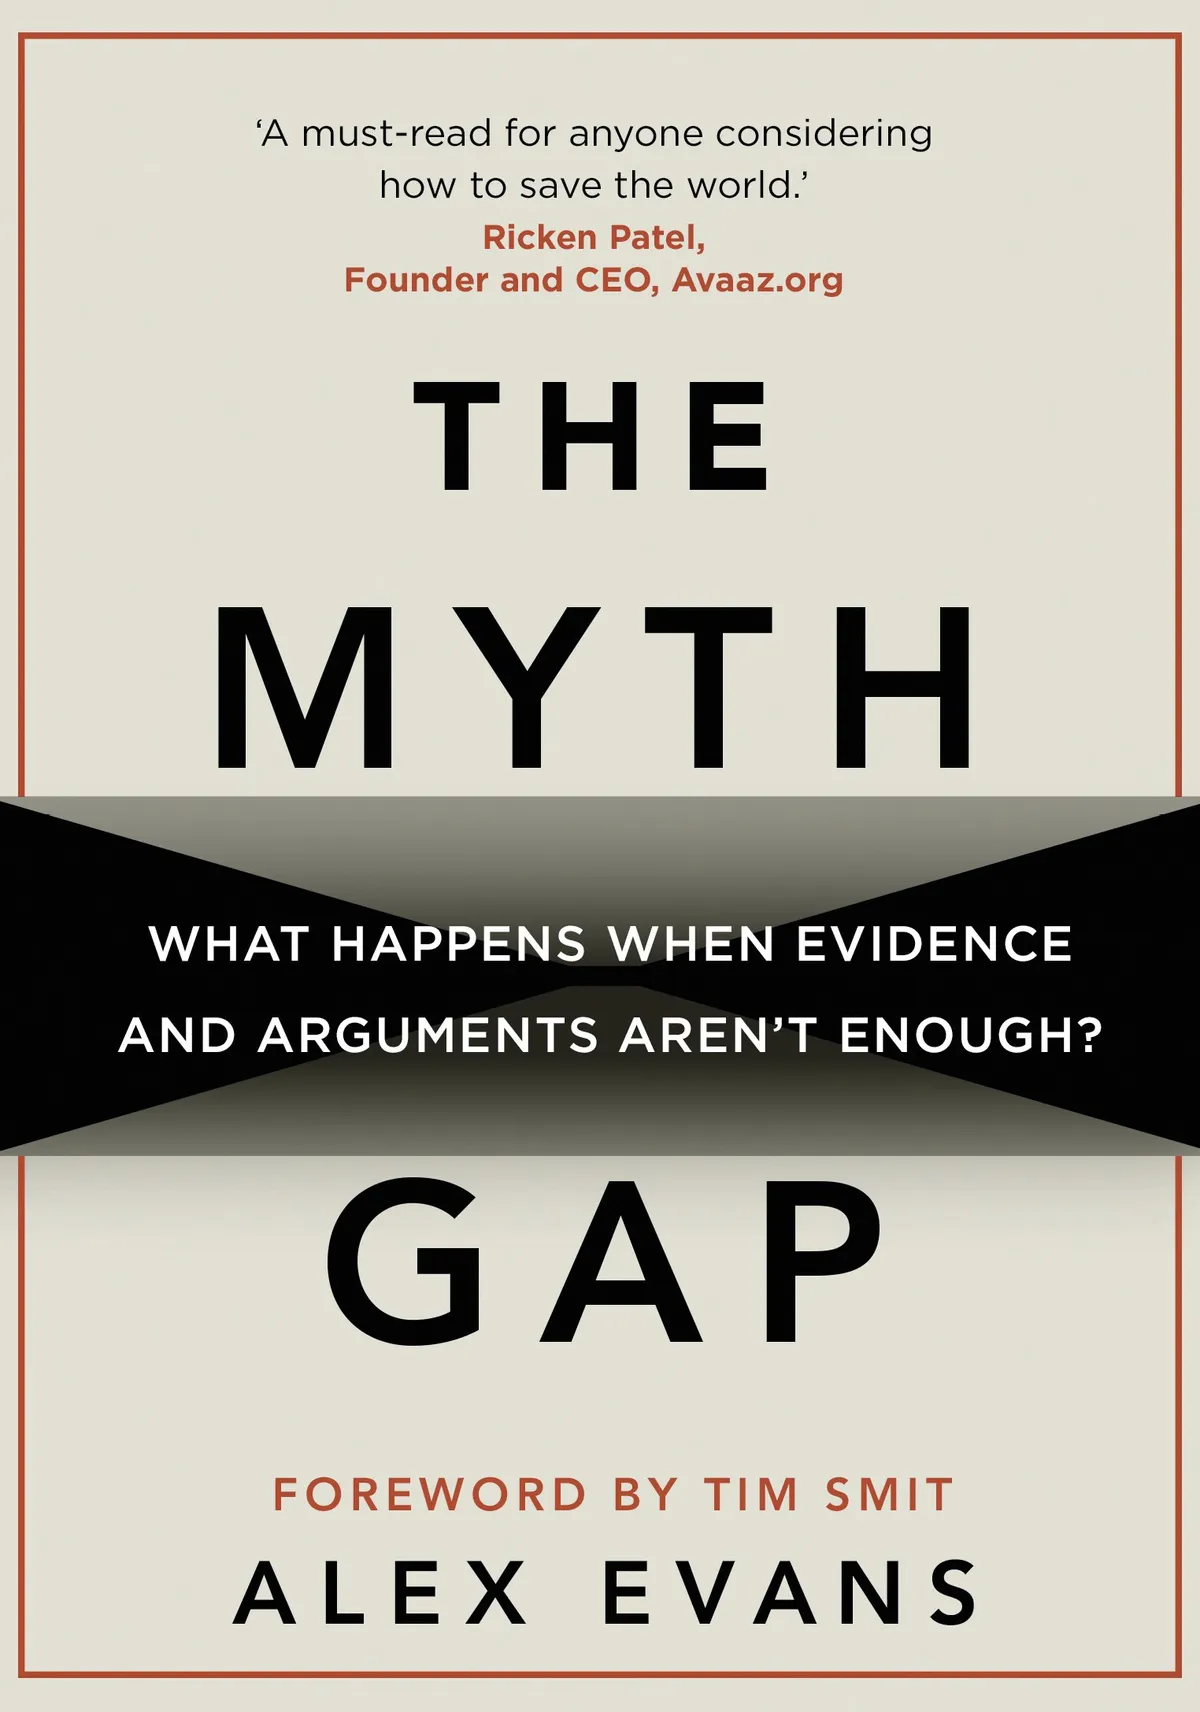 The Myth Gap: What Happens When Evidence and Arguments Aren’t Enough? by Alex Evans is out now (Eden Project Books, £9.99)